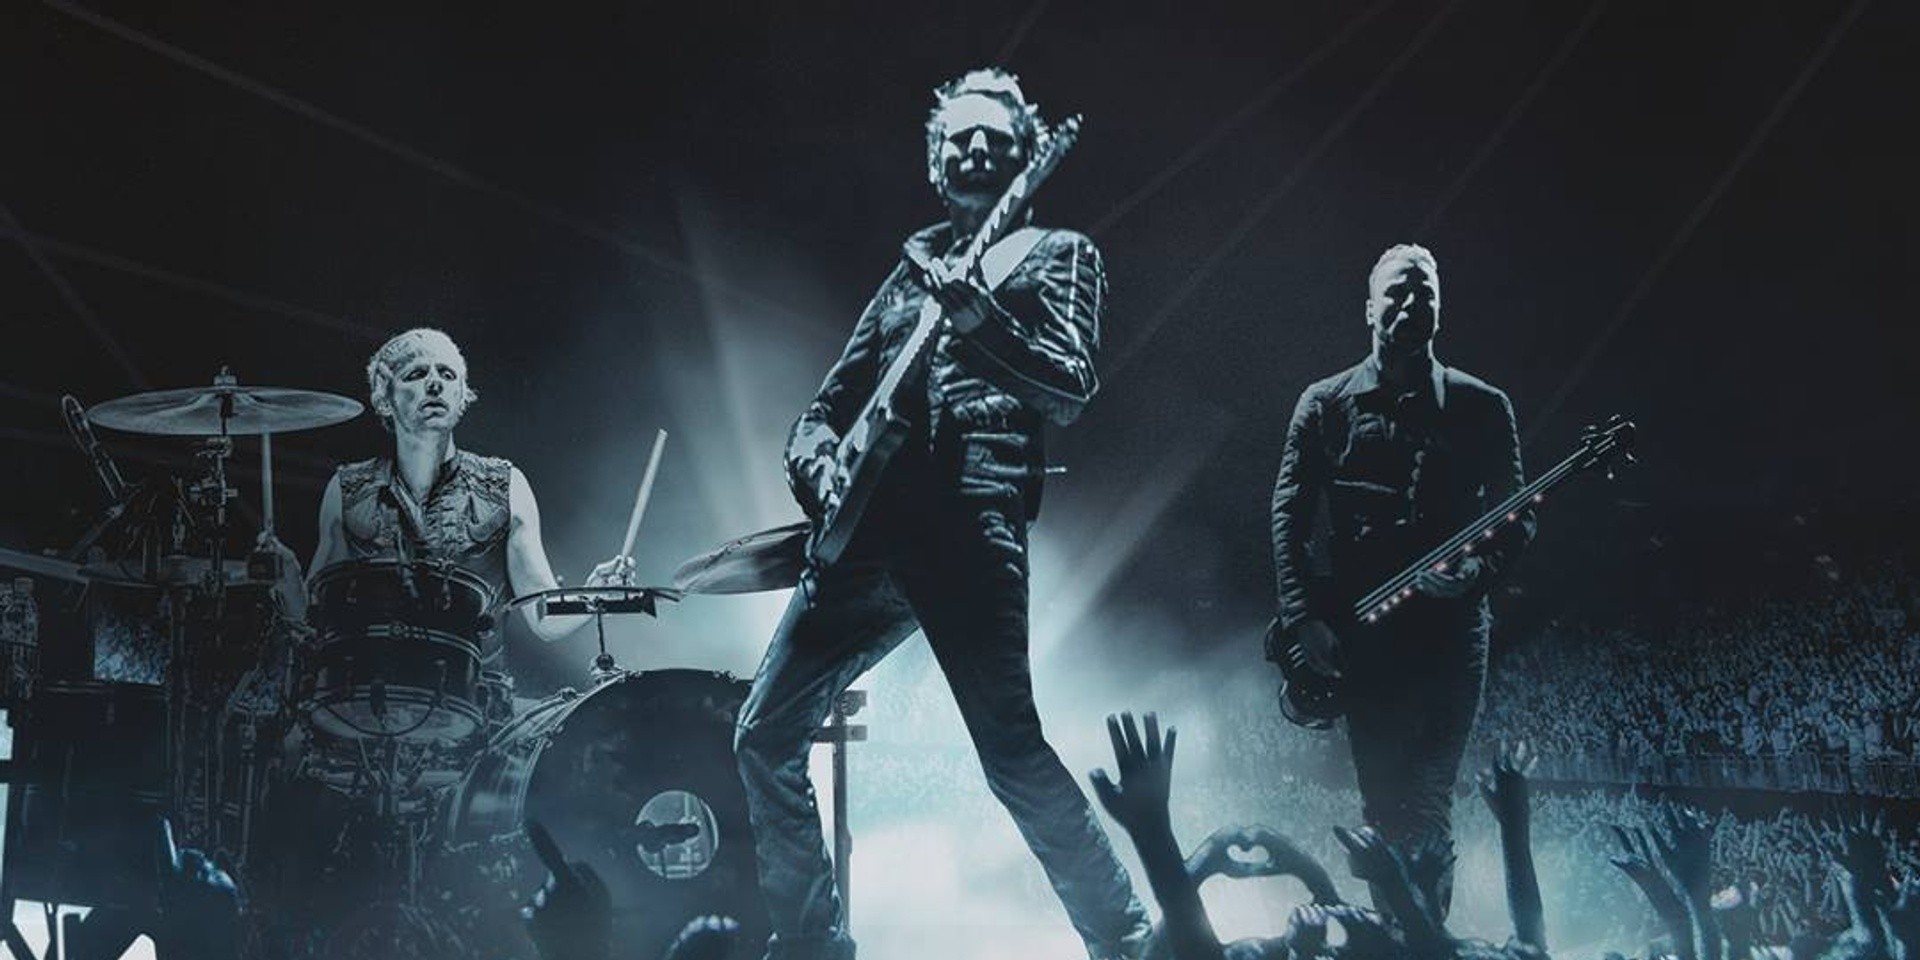 Muse: Drones World Tour concert film to screen at The Projector for one night only